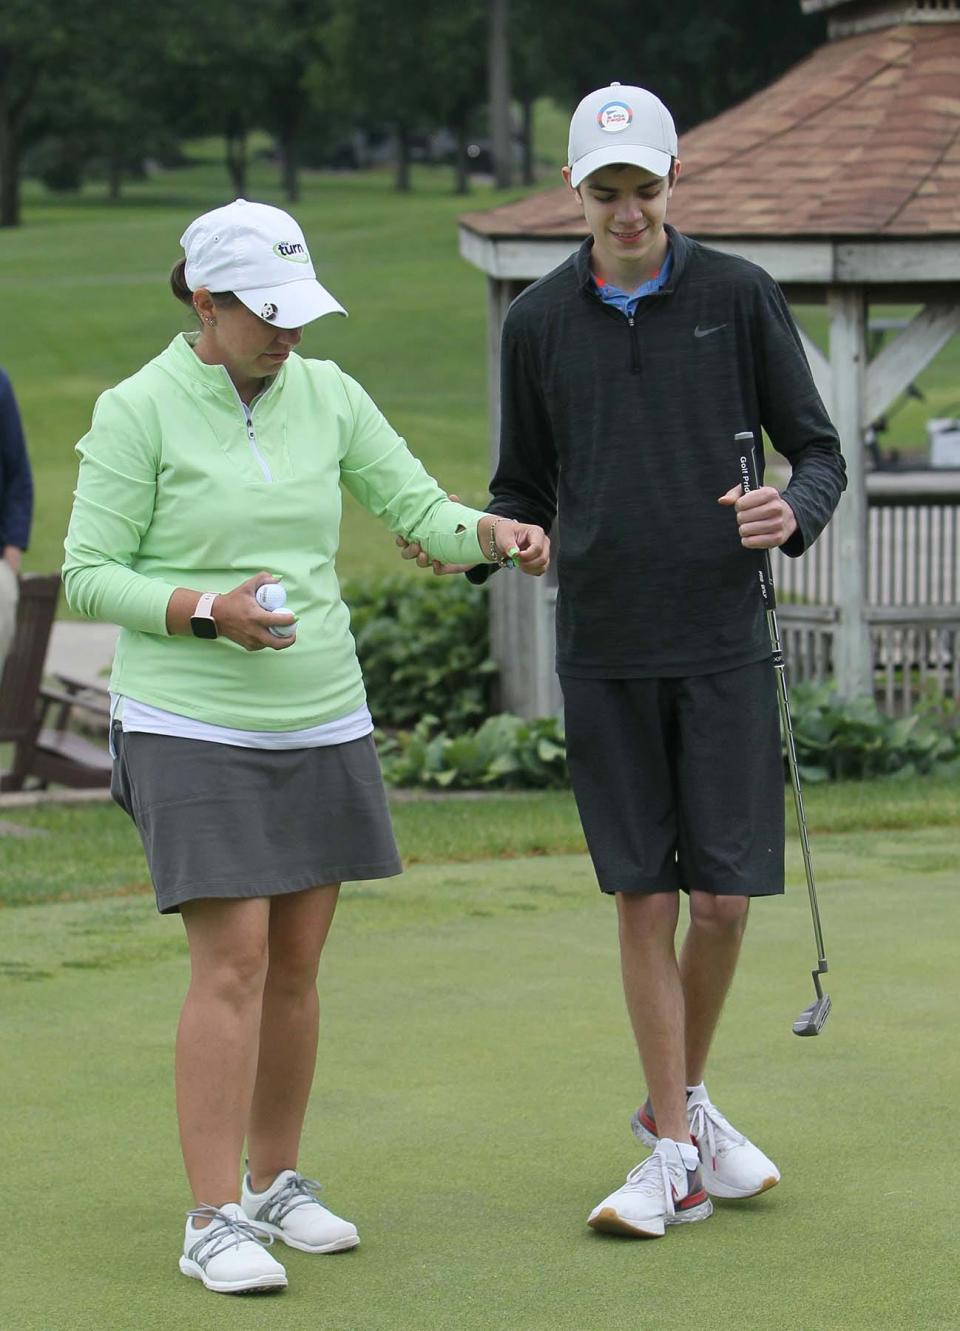 Huston Nagy, 16, of North Olmsted, who is blind, is assisted by coach Erin Craig to the spot where he will putt on the putting green at Firestone Country Club on Monday in Akron.